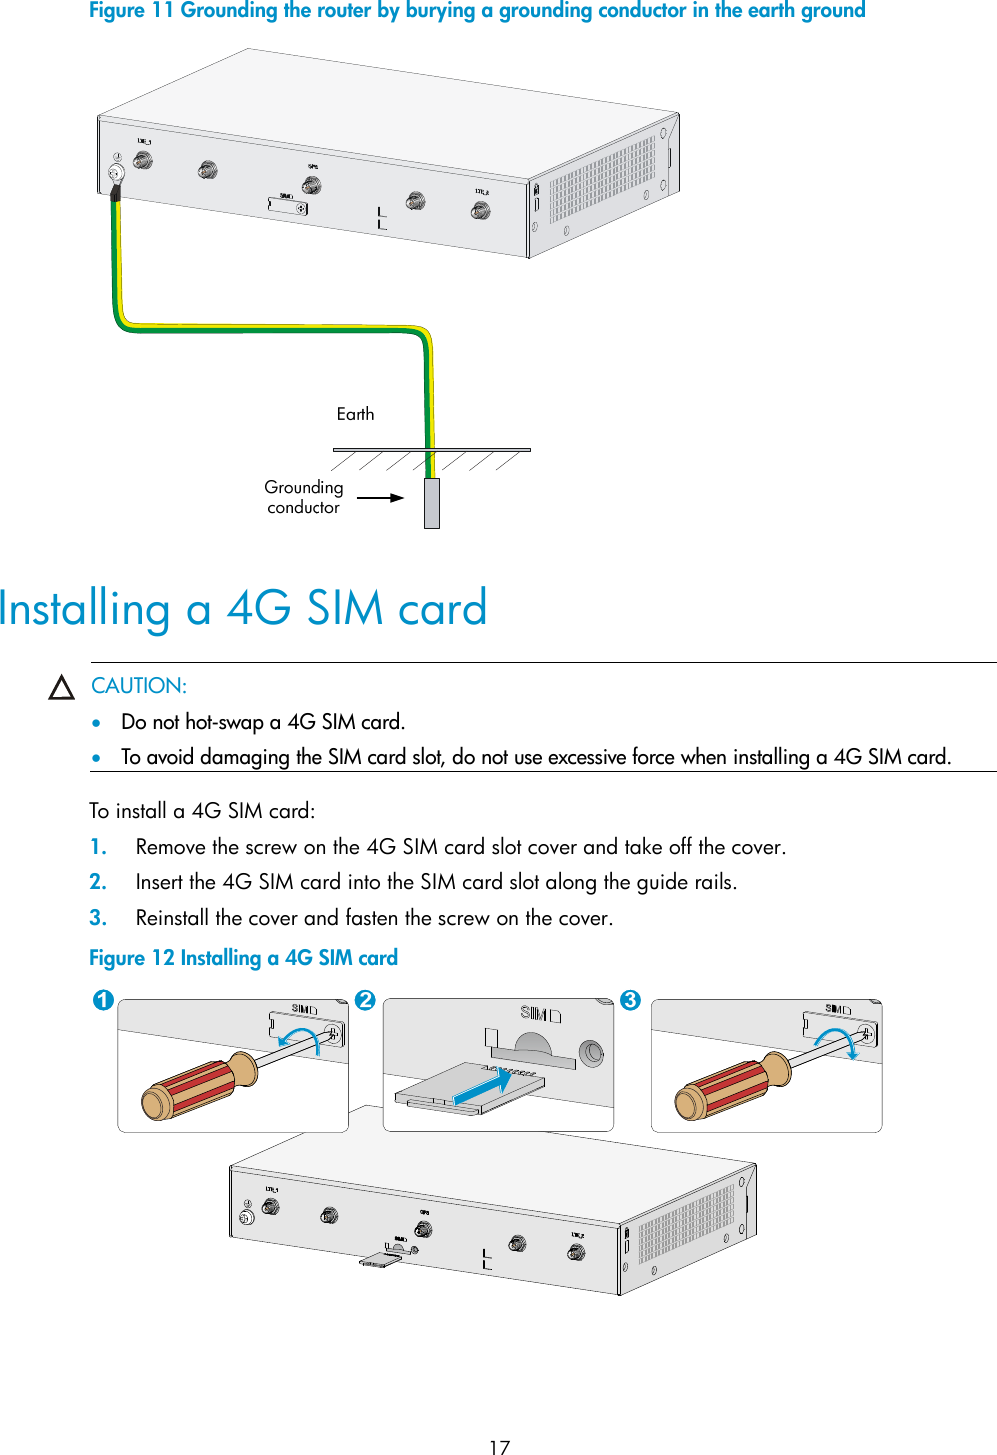  17 Figure 11 Grounding the router by burying a grounding conductor in the earth ground     Installing a 4G SIM card  CAUTION:  Do not hot-swap a 4G SIM card.  To avoid damaging the SIM card slot, do not use excessive force when installing a 4G SIM card.  To install a 4G SIM card: 1. Remove the screw on the 4G SIM card slot cover and take off the cover. 2. Insert the 4G SIM card into the SIM card slot along the guide rails. 3. Reinstall the cover and fasten the screw on the cover. Figure 12 Installing a 4G SIM card   